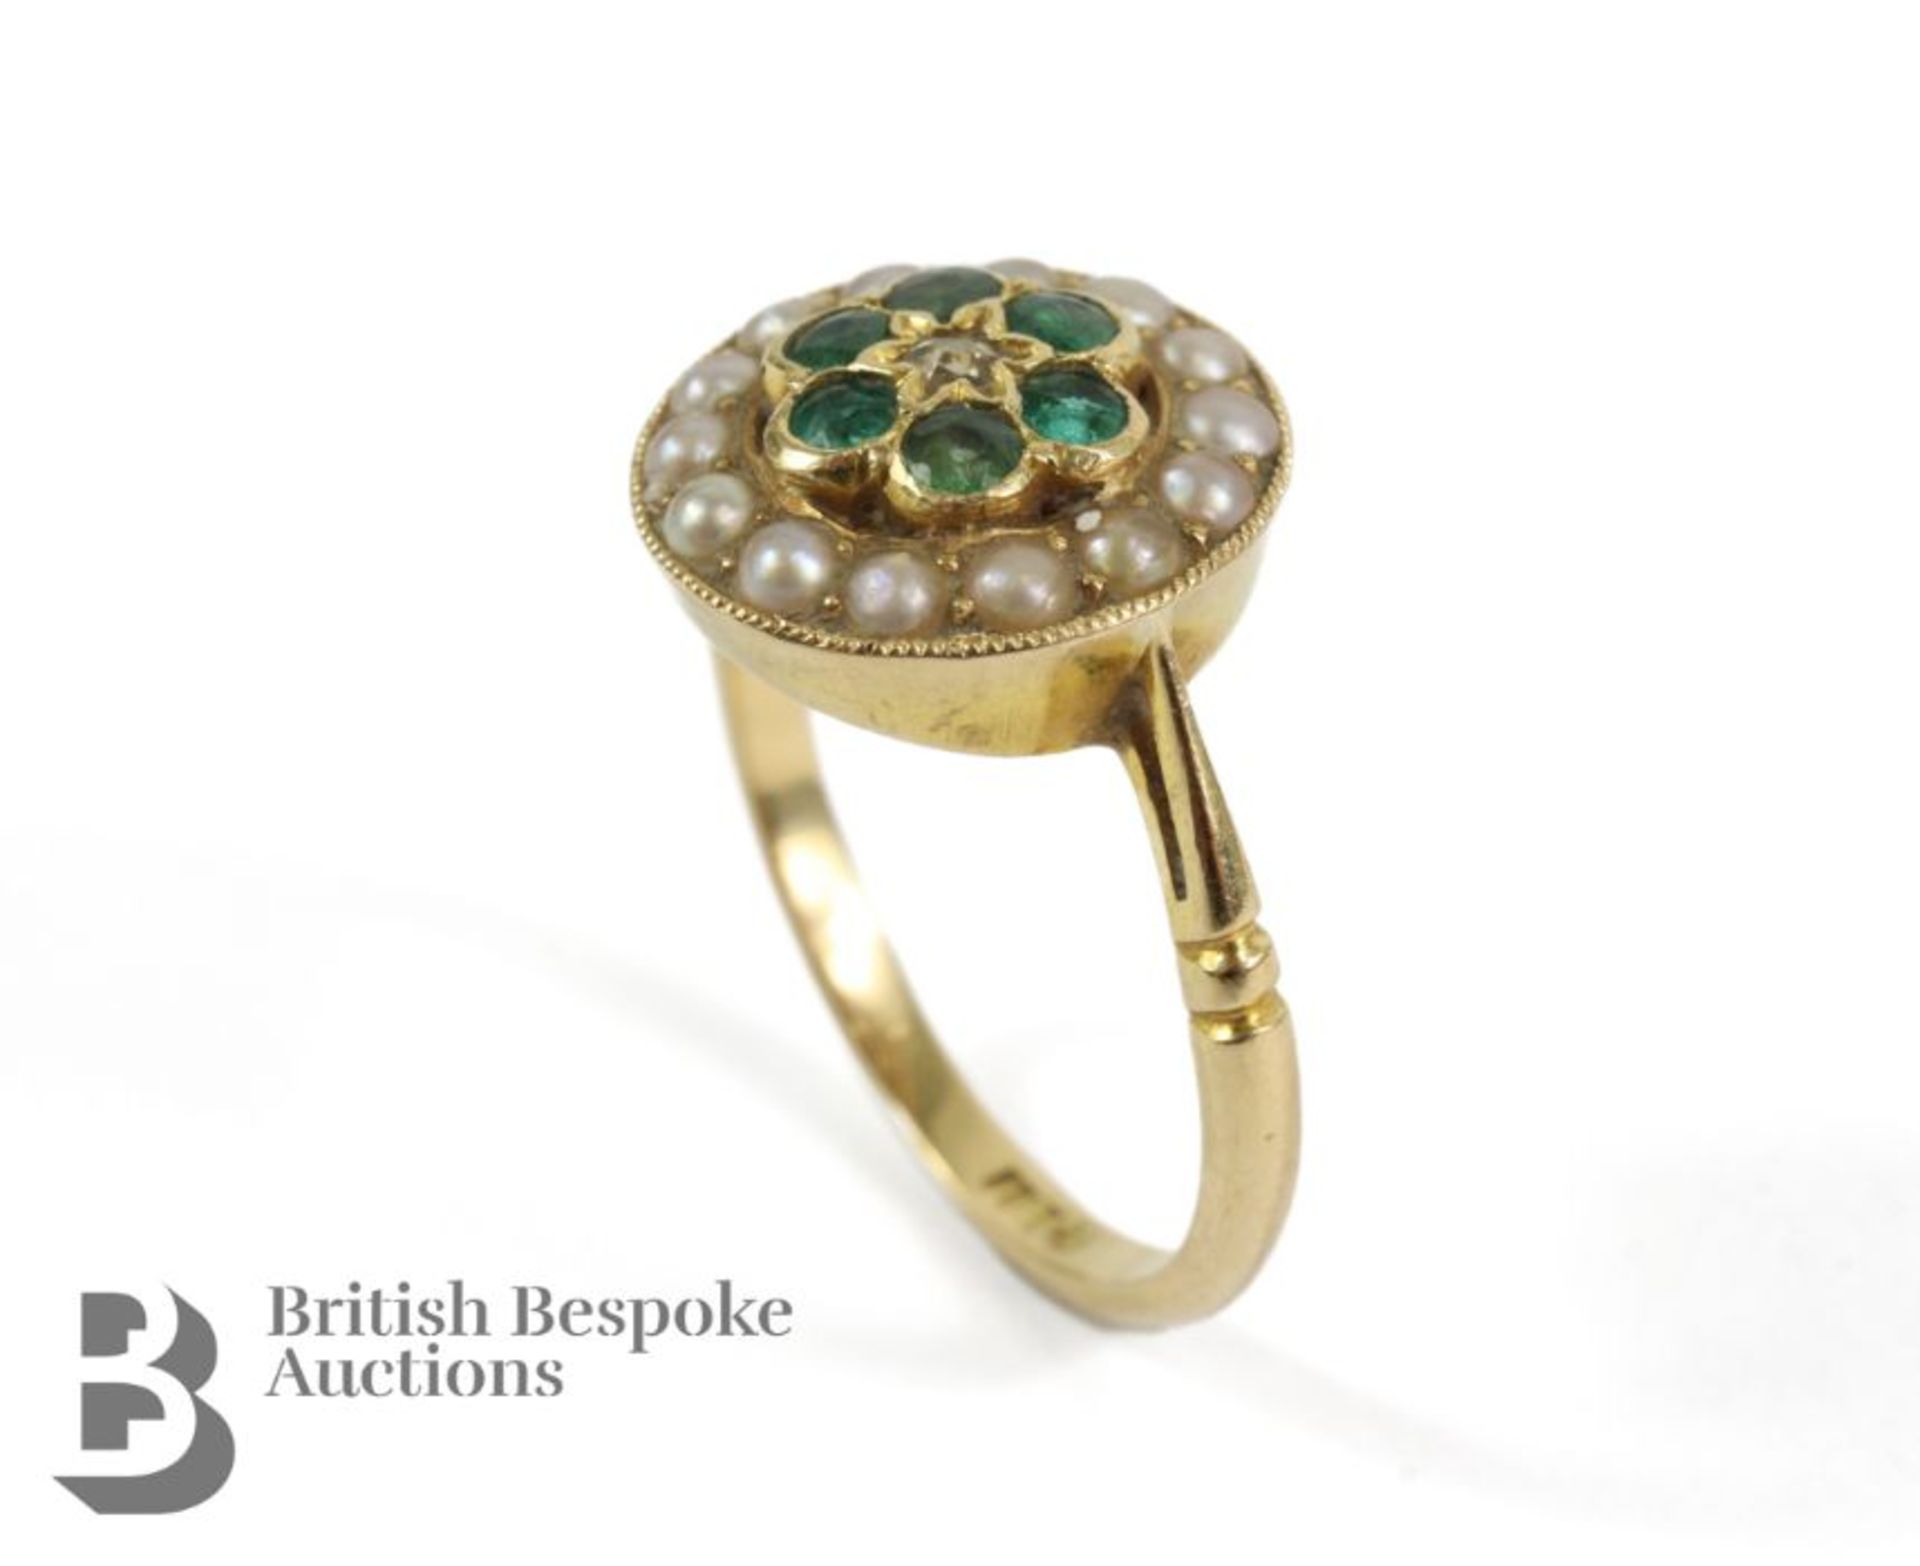 19th Century 18ct Gold Diamond, Emerald and Pearl Ring - Image 4 of 5